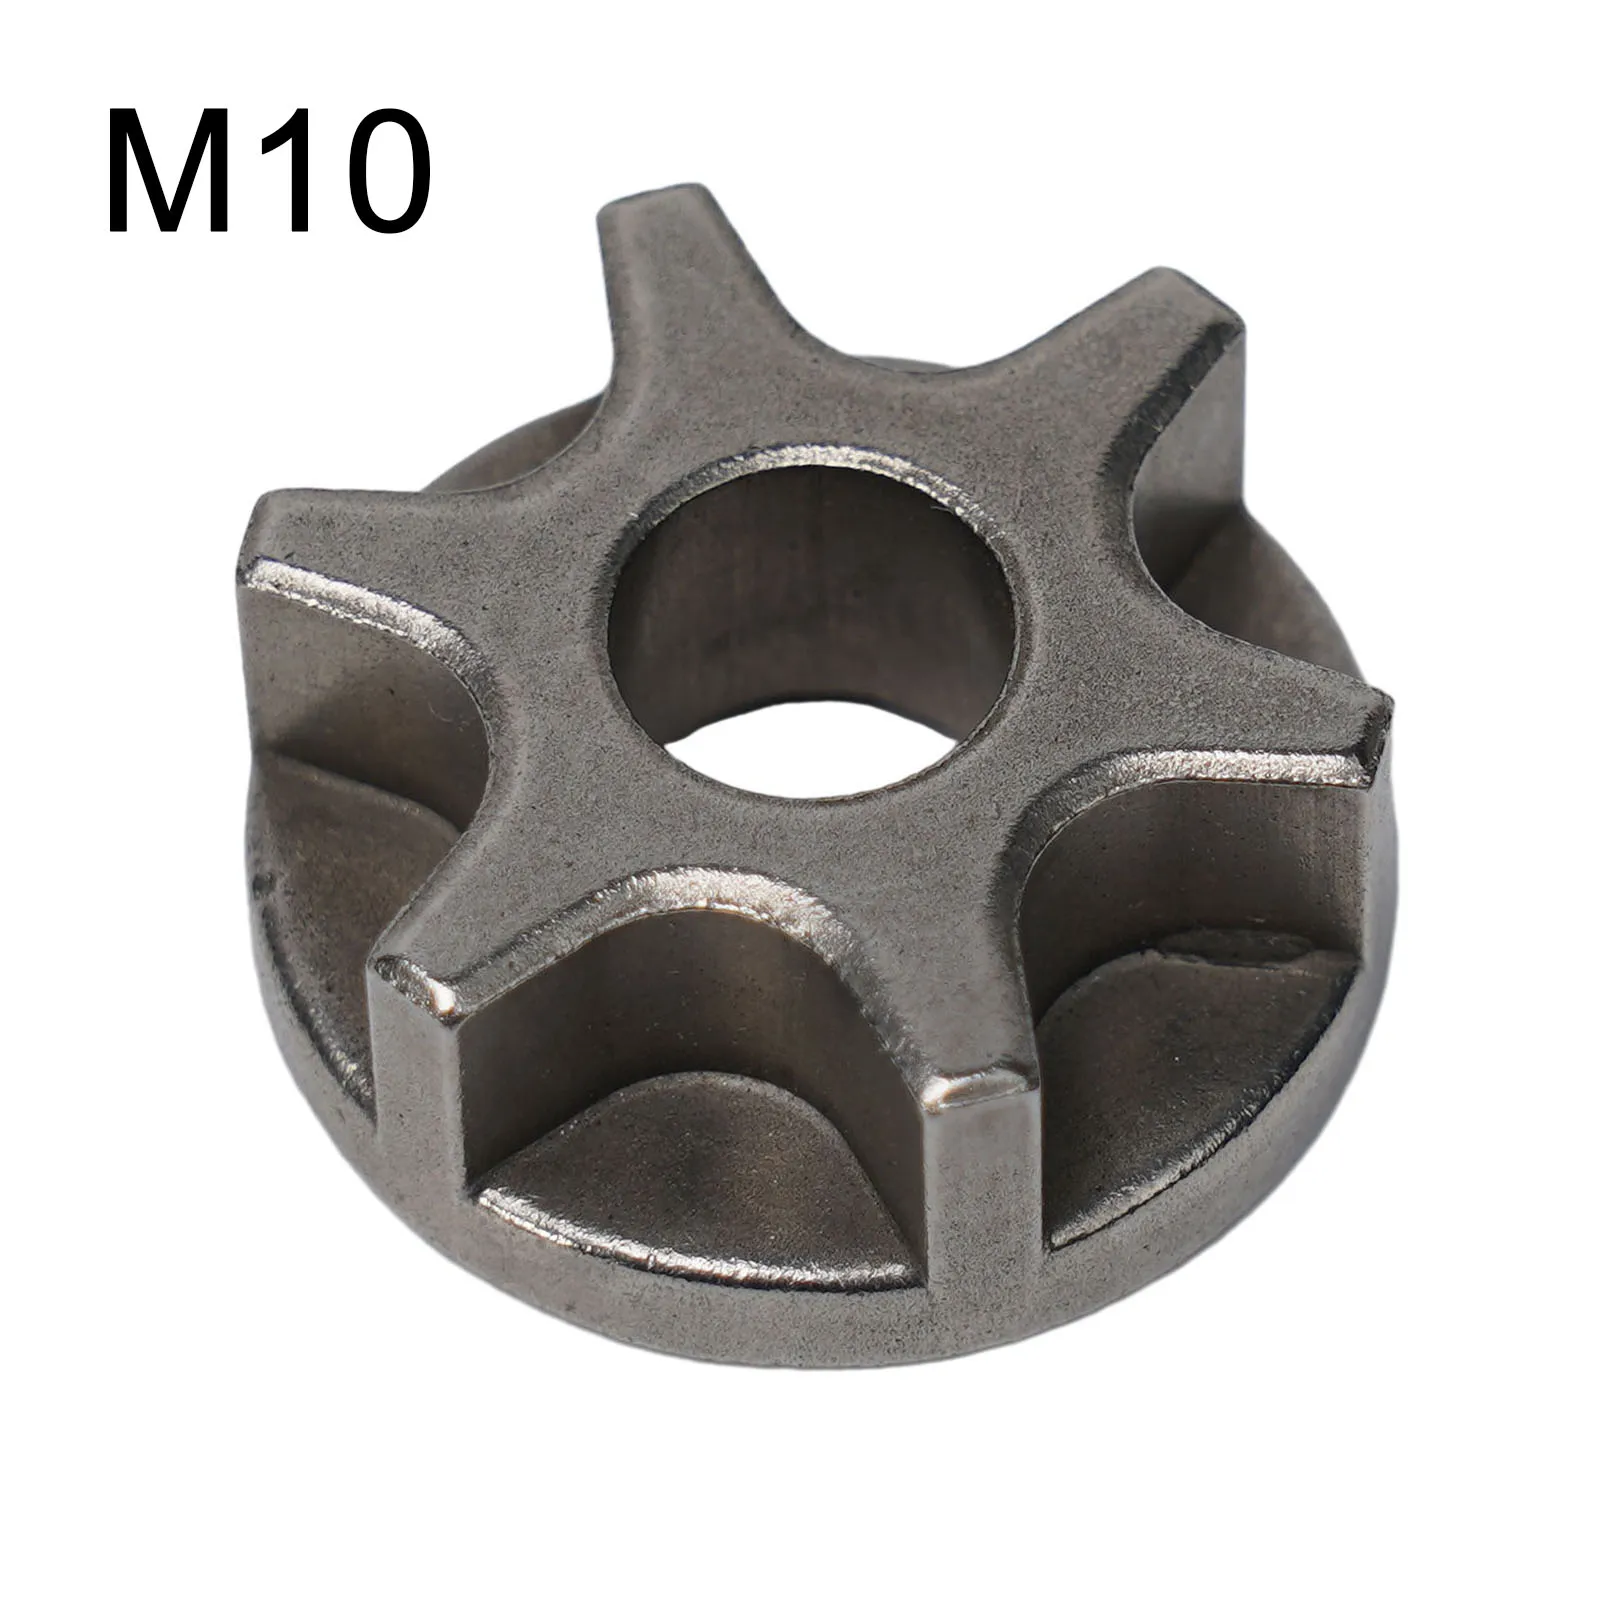 

1pc M10 M14 M16 Sprocket Chain Saw Gear For 100 115 125 150 180 Angle Grinder Replacement Gear Chainsaw Bracket Part